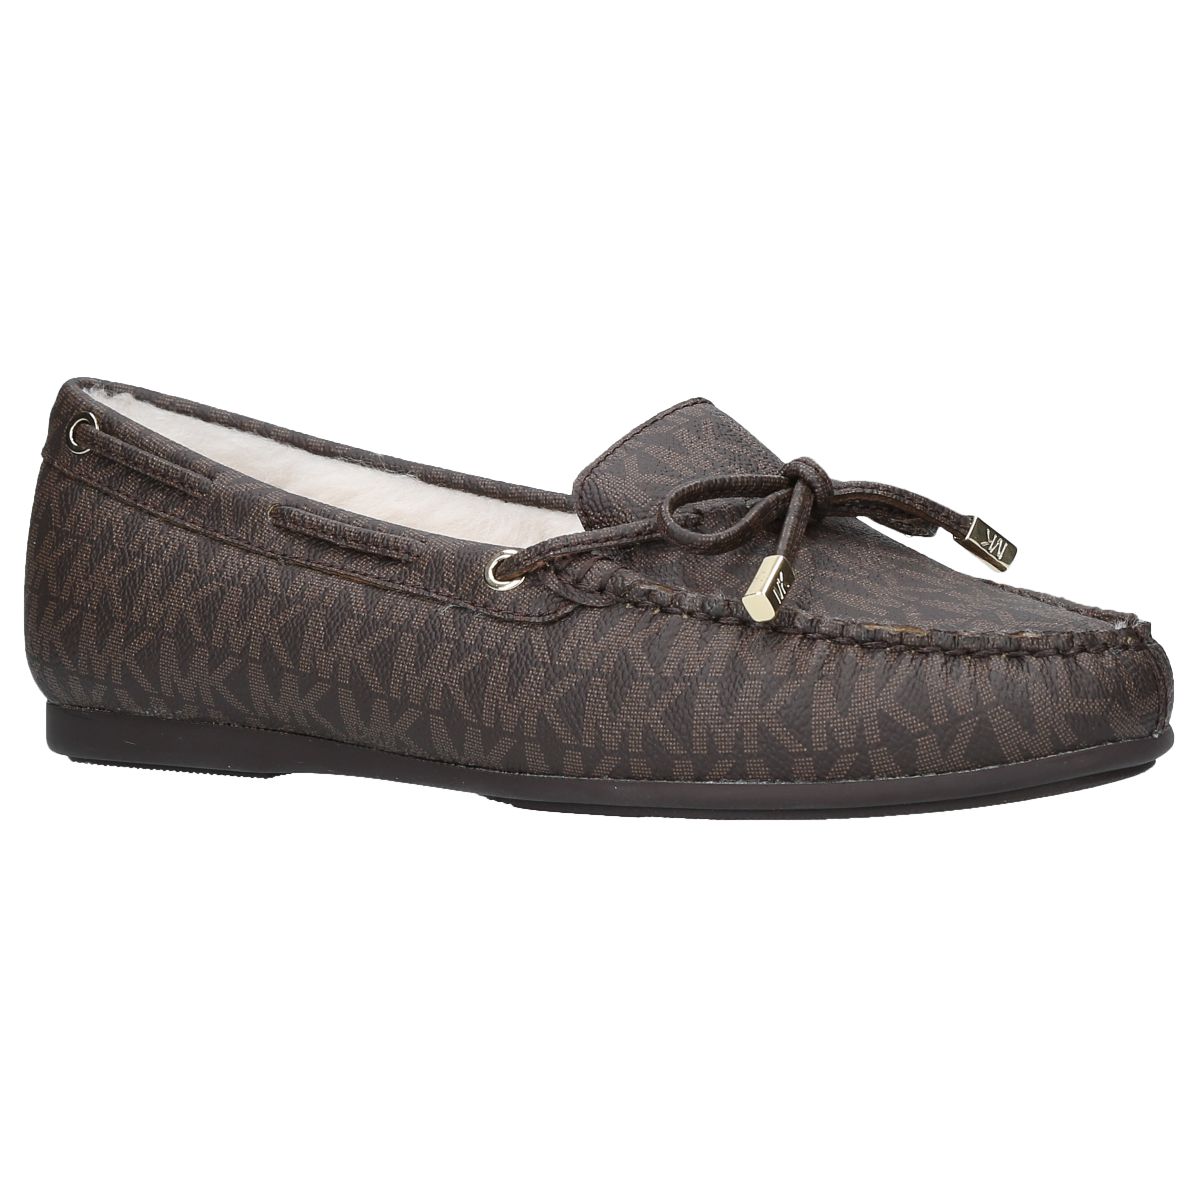 michael michael kors sutton shearling lined moccasins